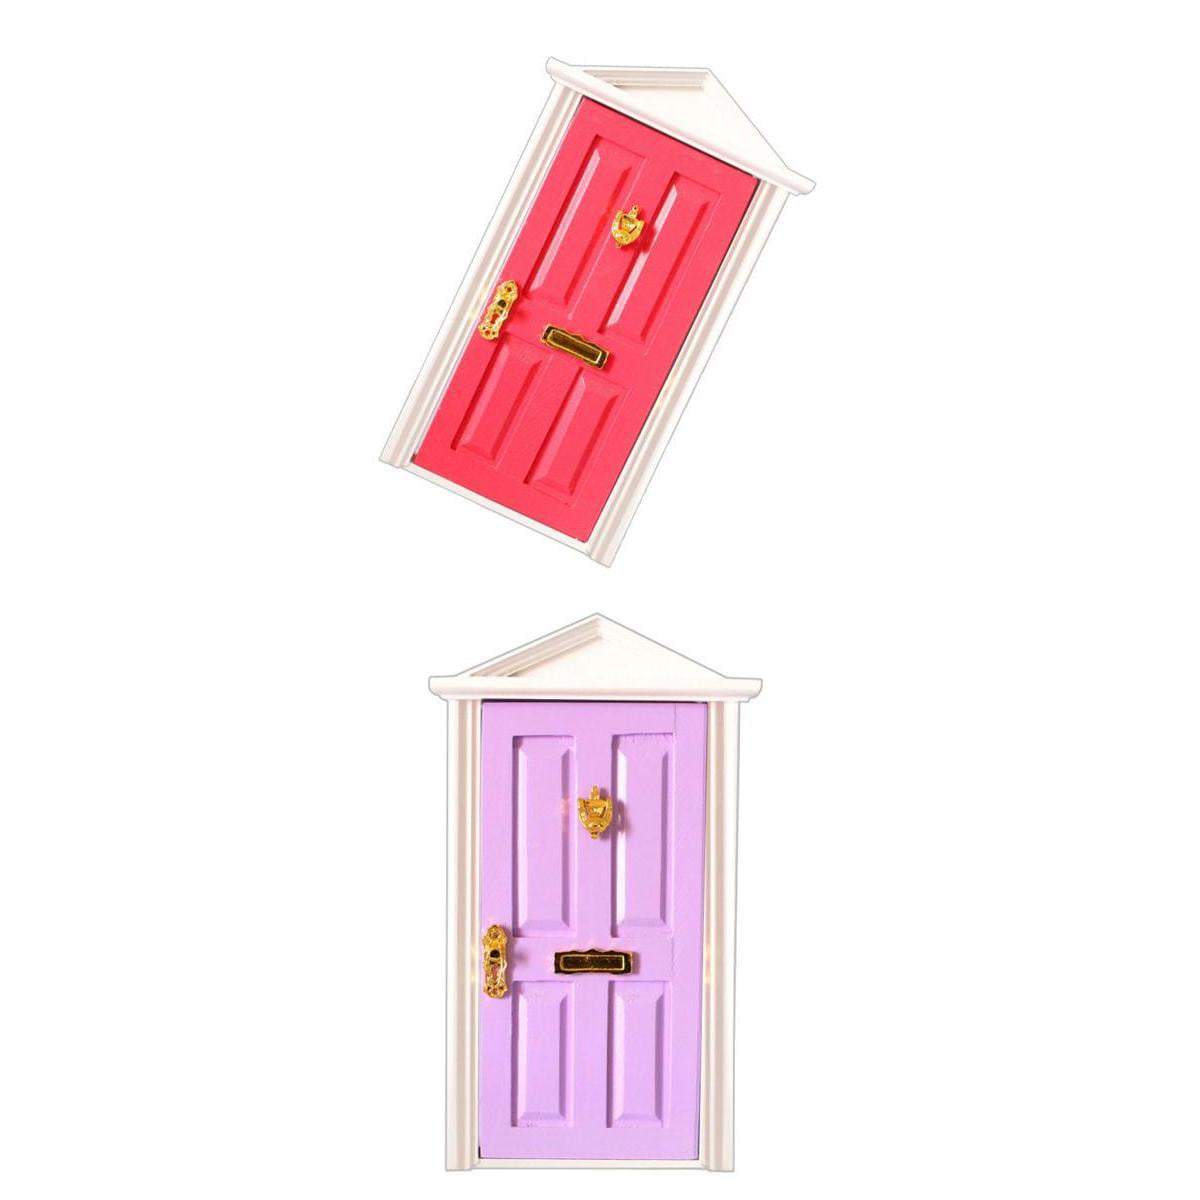 1:12 Dollhouse Miniature Wood Fairy Door Red Assembled with Metal Accessories 